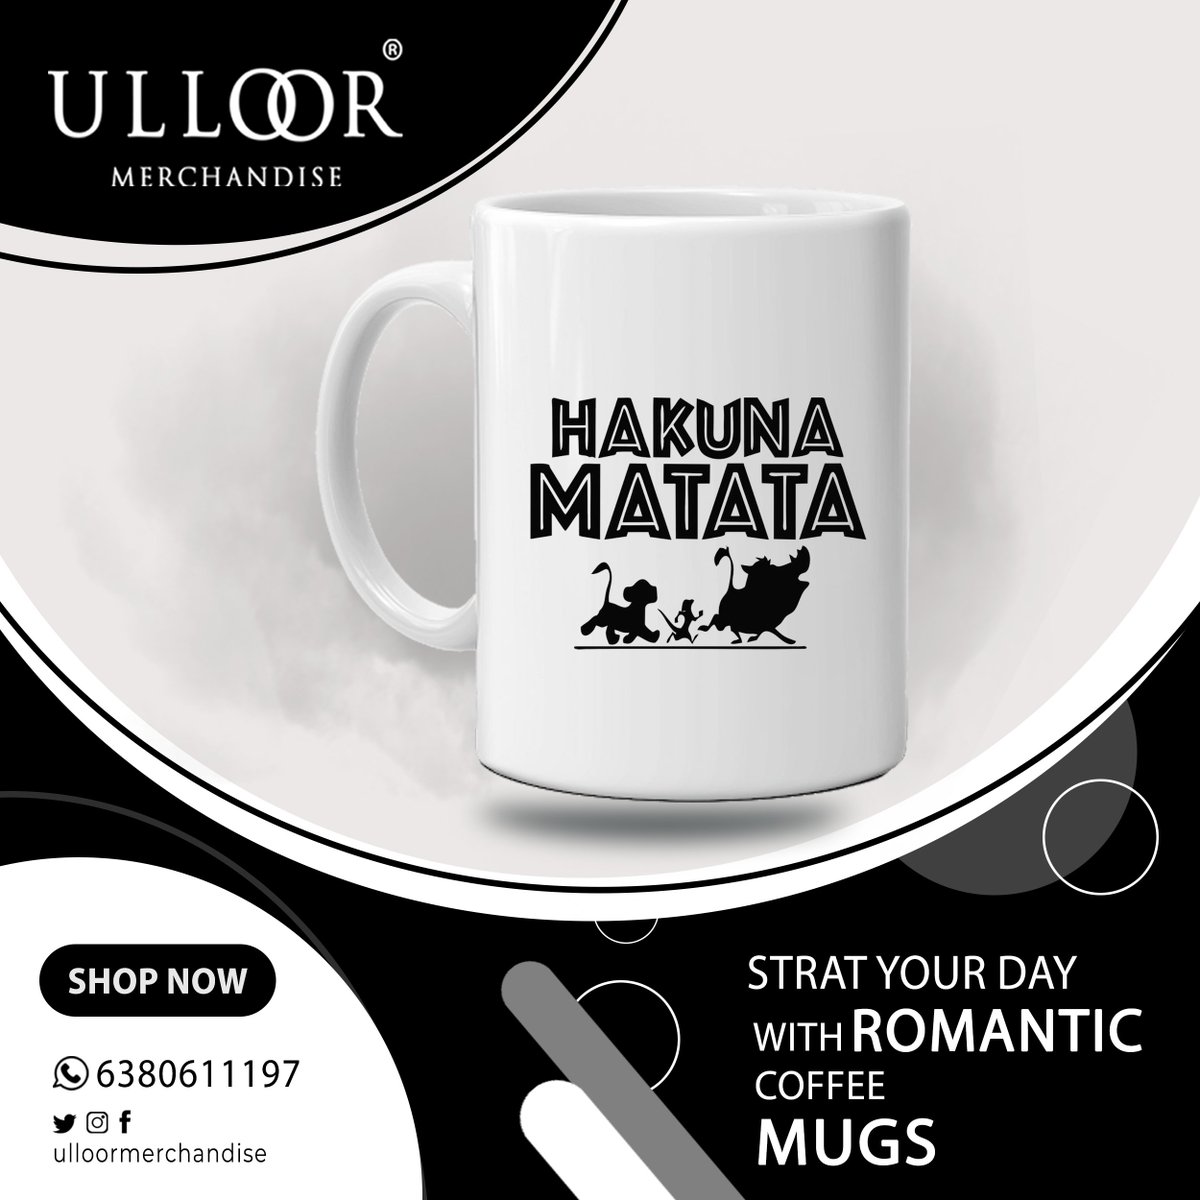 Get the most romantic coffee mugs and start your day together with a hot sip of coffee. We  manufacture couple coffee mugs and spread positive vibes to all. 

Visit us : ulloormerchandise.com

#mugs #cups #coffemug #personalizedmugs #ulloormerchandise